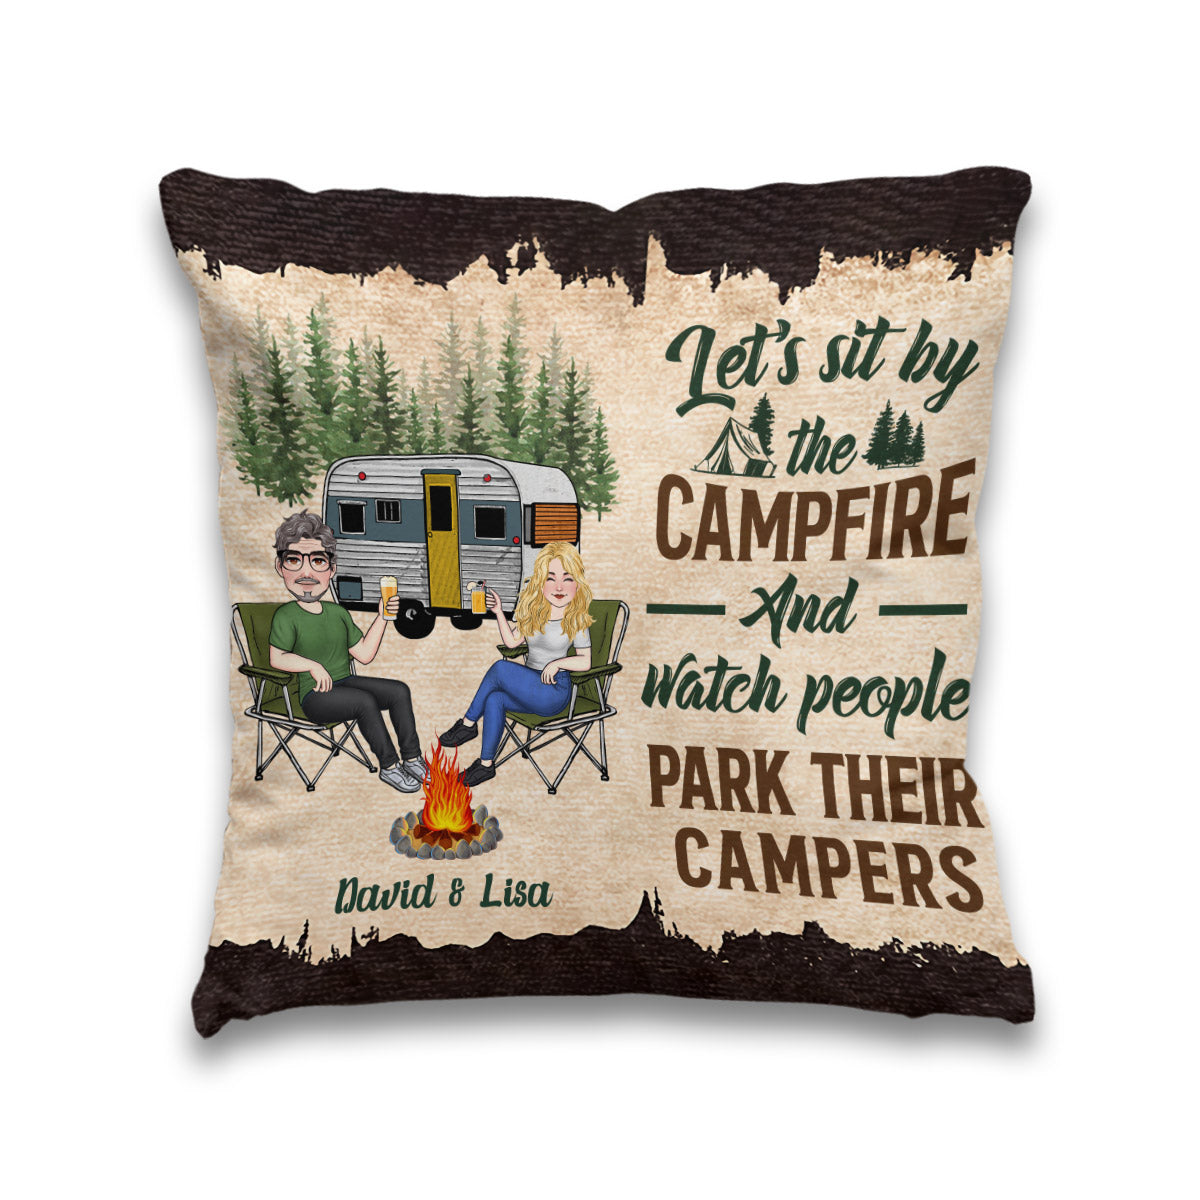 Let's Sit By The Campfire - Personalized Camping Throw Pillow